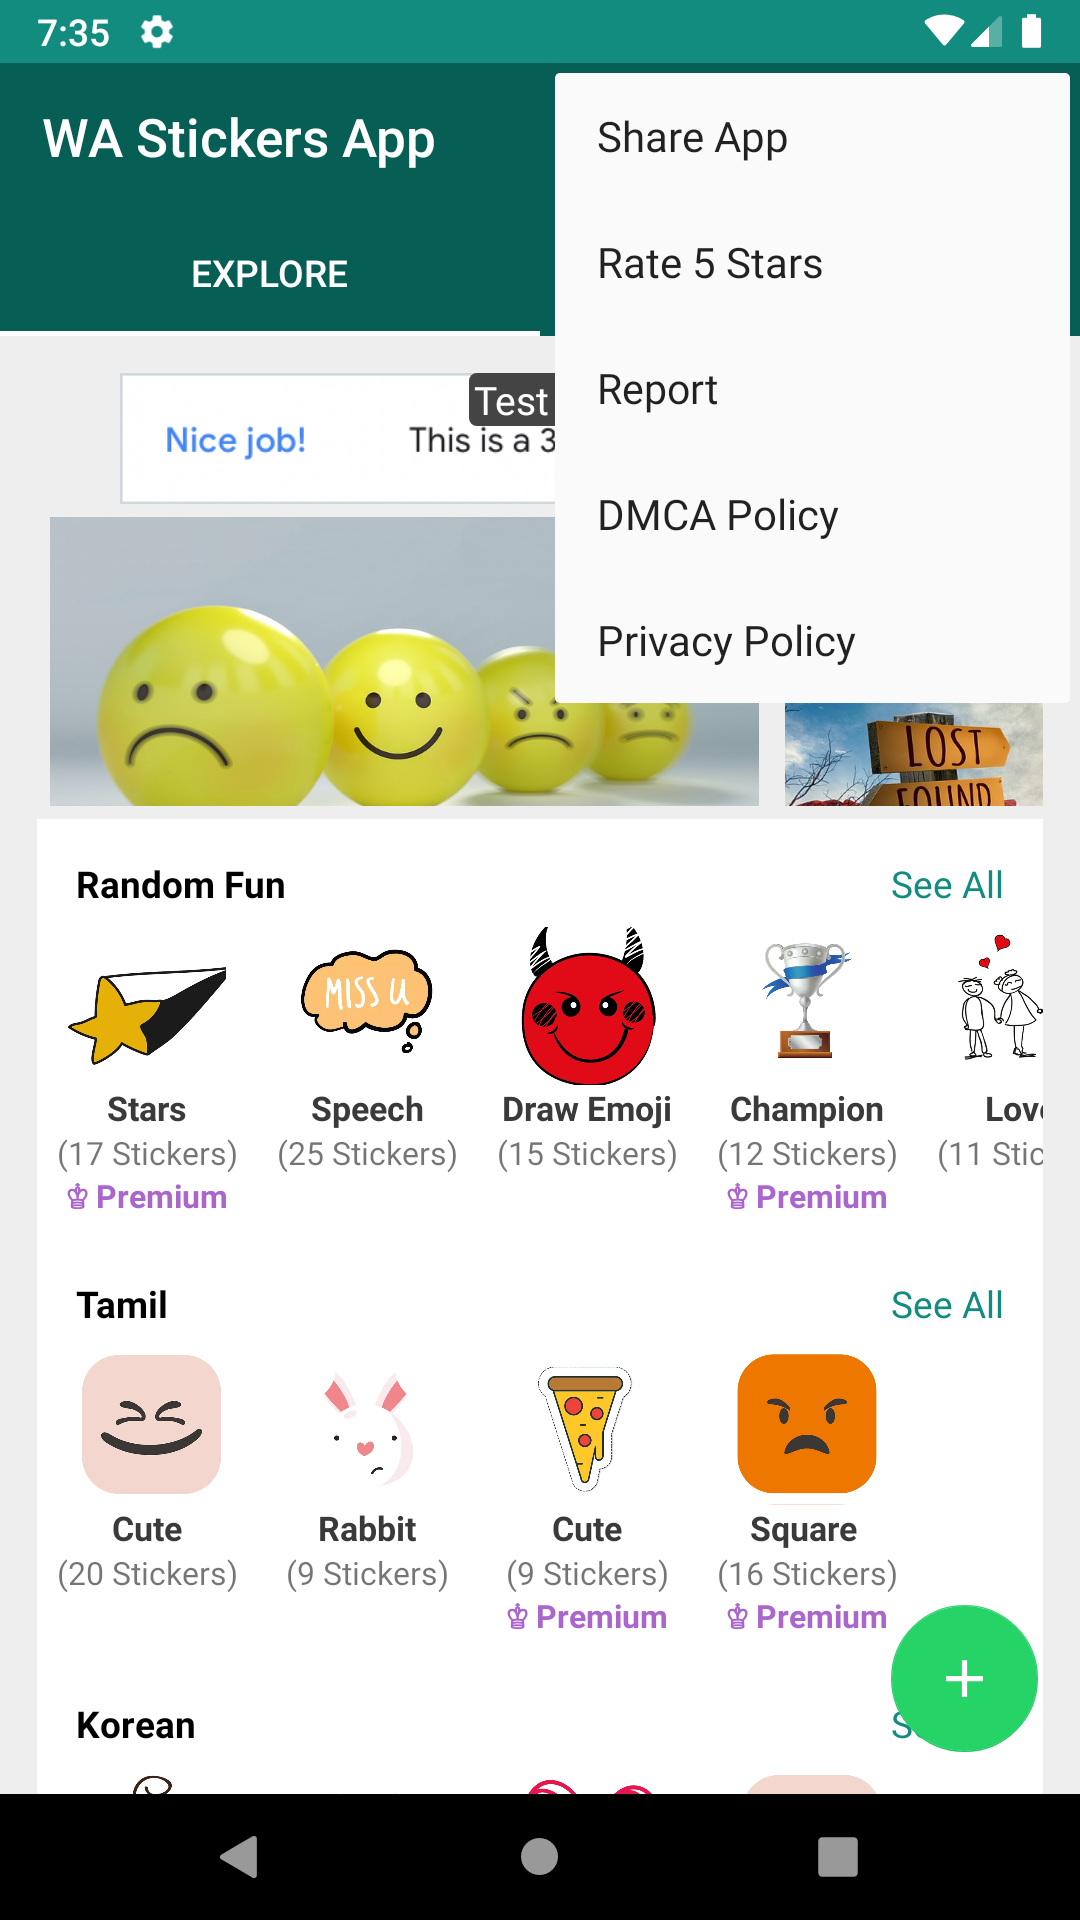 Emrys Online Android Stickers App For Whatsapp With Sticker Maker